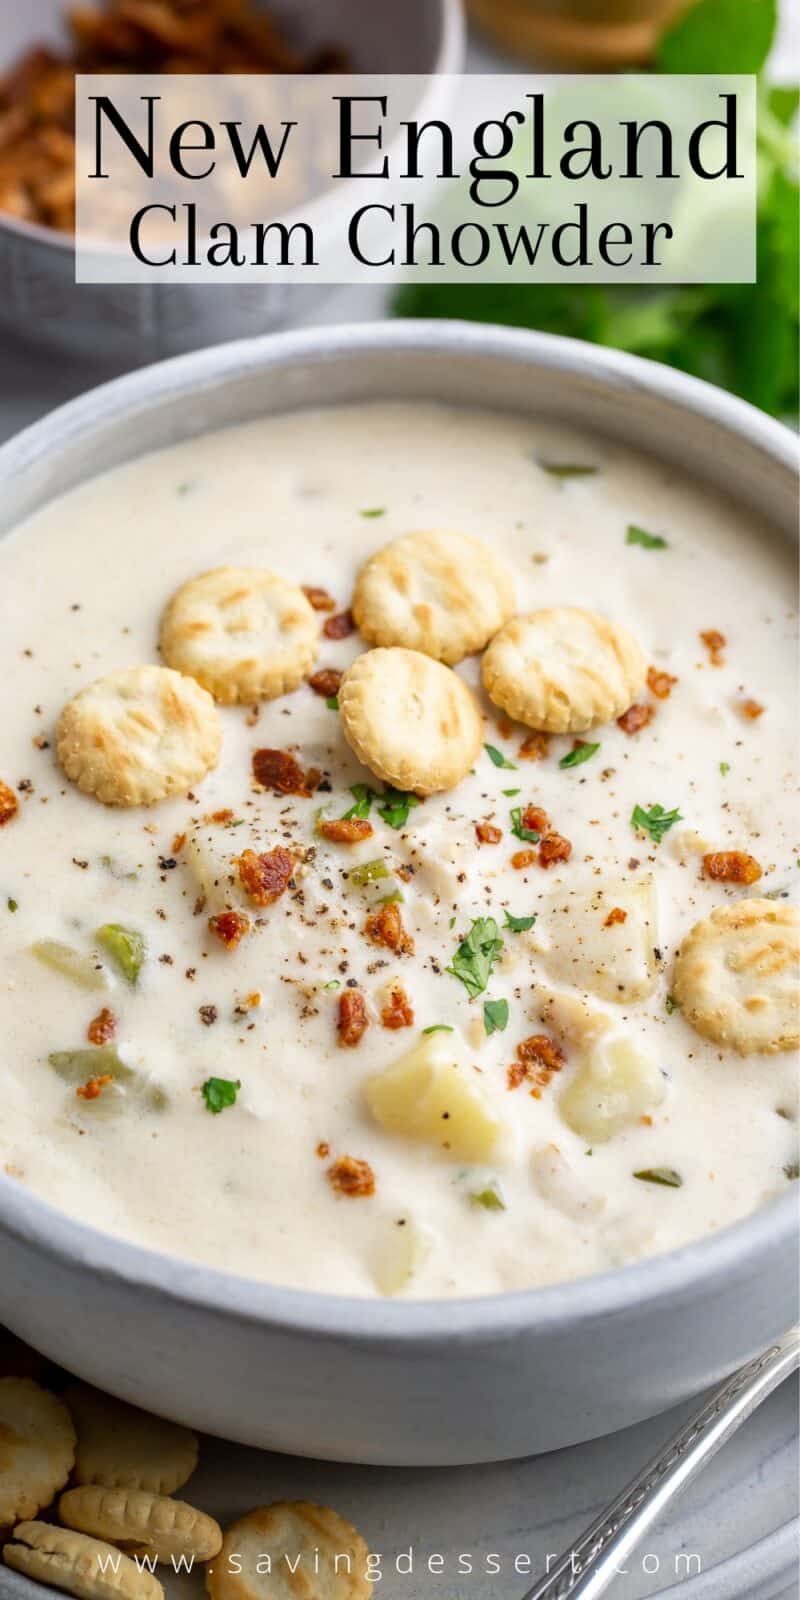 Closeup of a bowl of clam chowder with oyster crackers.